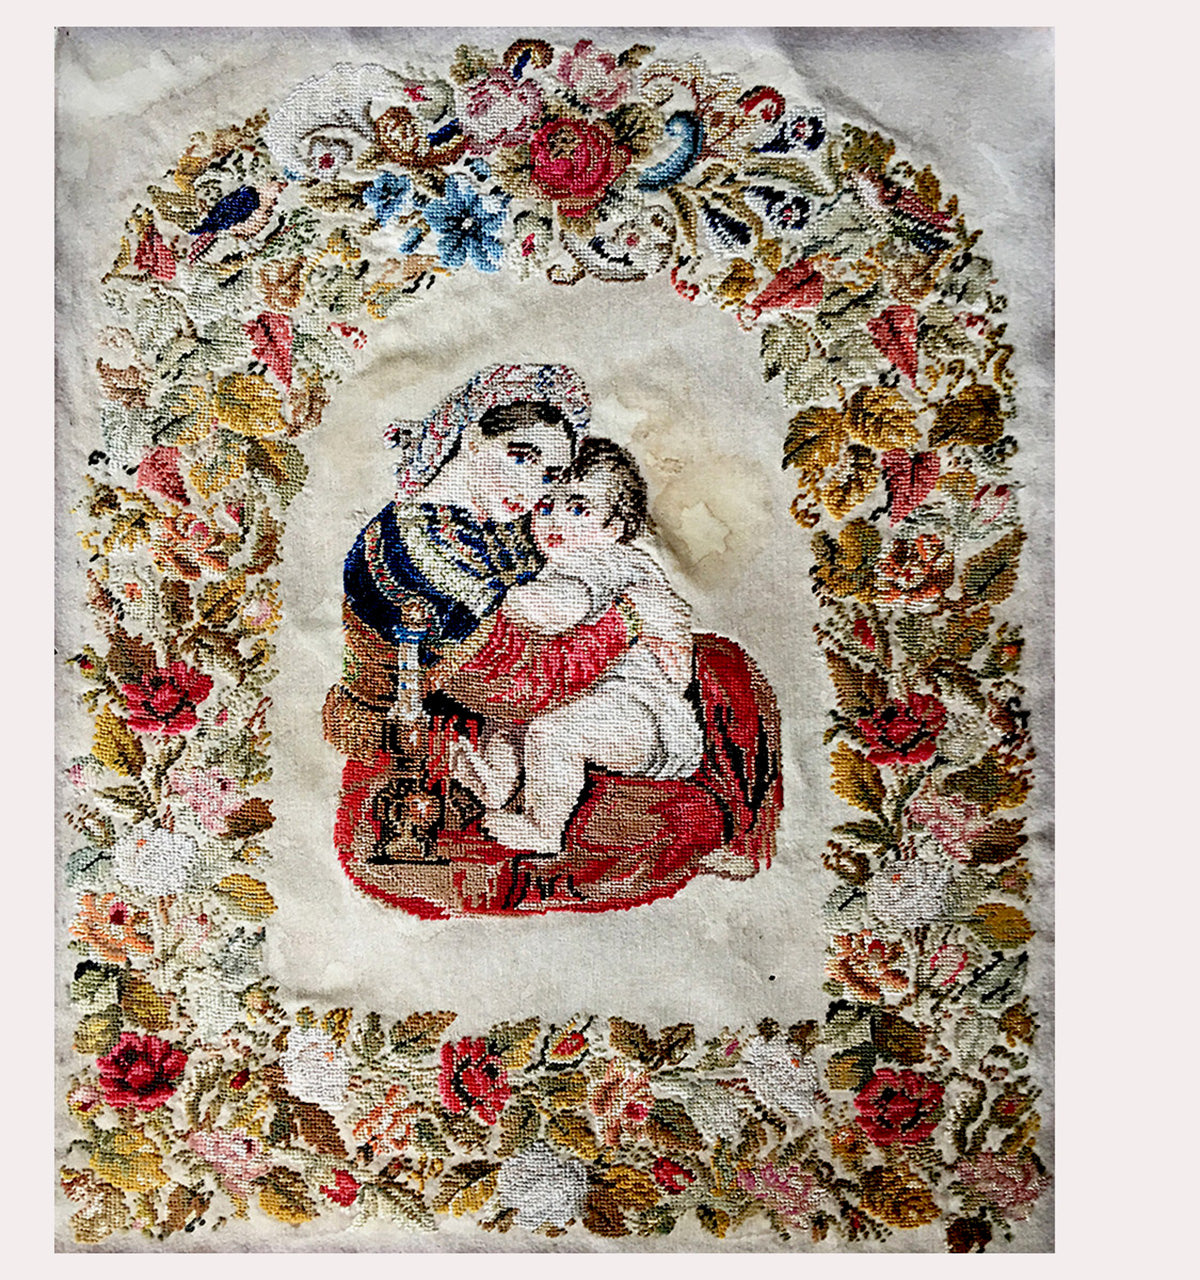 Antique French Embroidery Panel, Madonna and Child, Frame of Flowers, Frame or Pillow